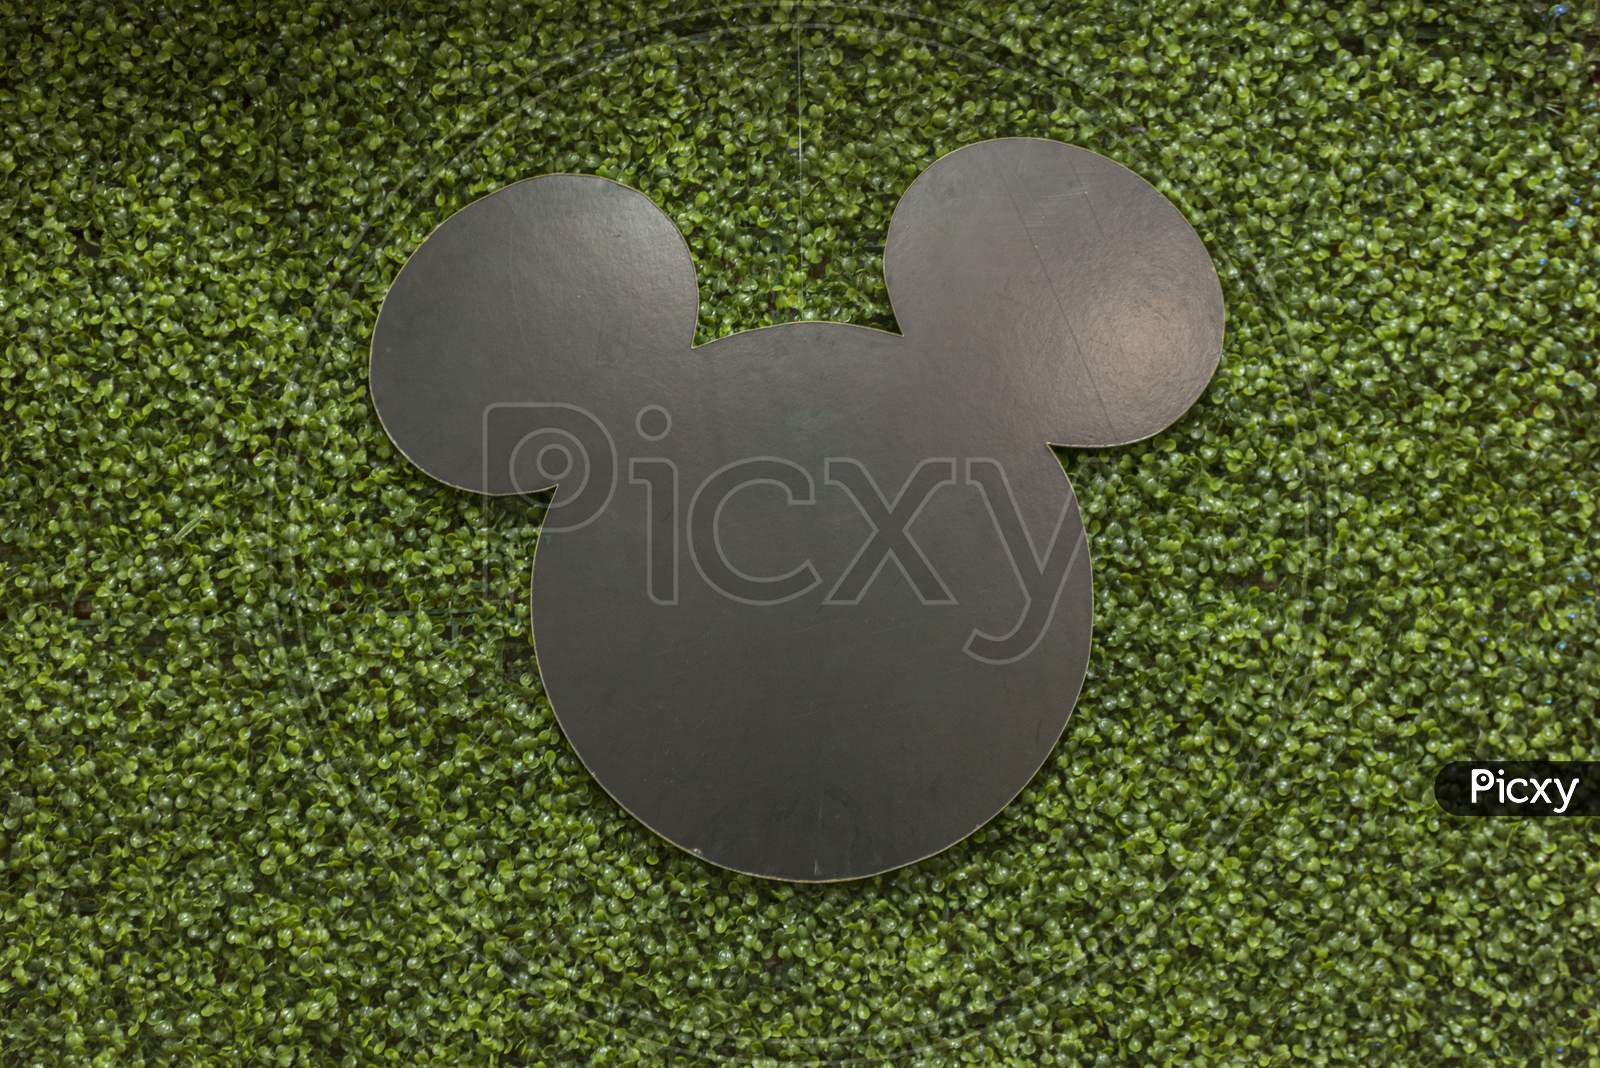 Beautiful Green Wall Grass Panel. Black Wood In The Shape Of Mickey Mouse On The Panel.